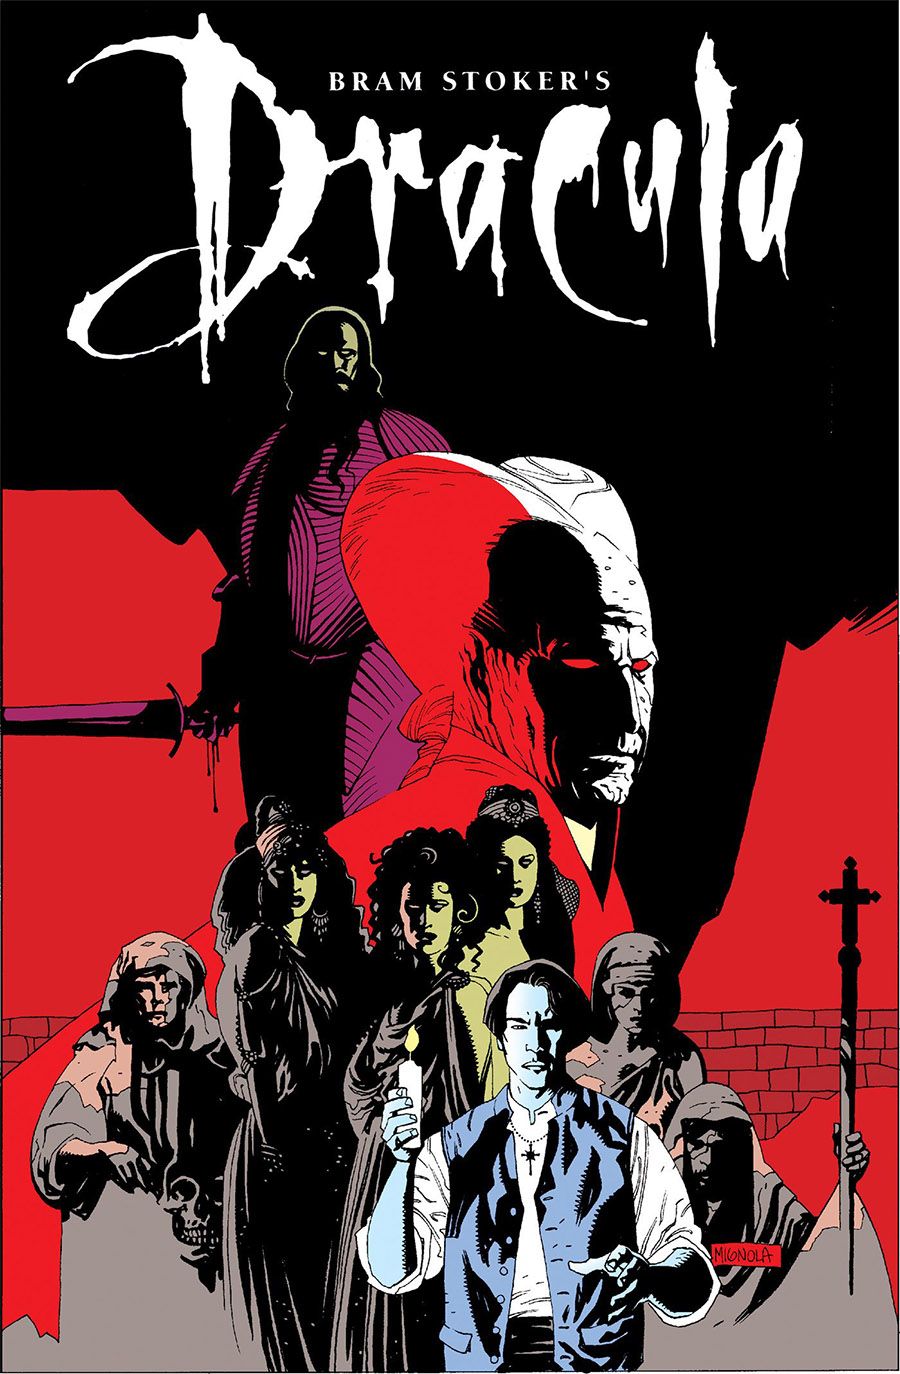 Bram Stoker's Dracula by Mike Mignola cover